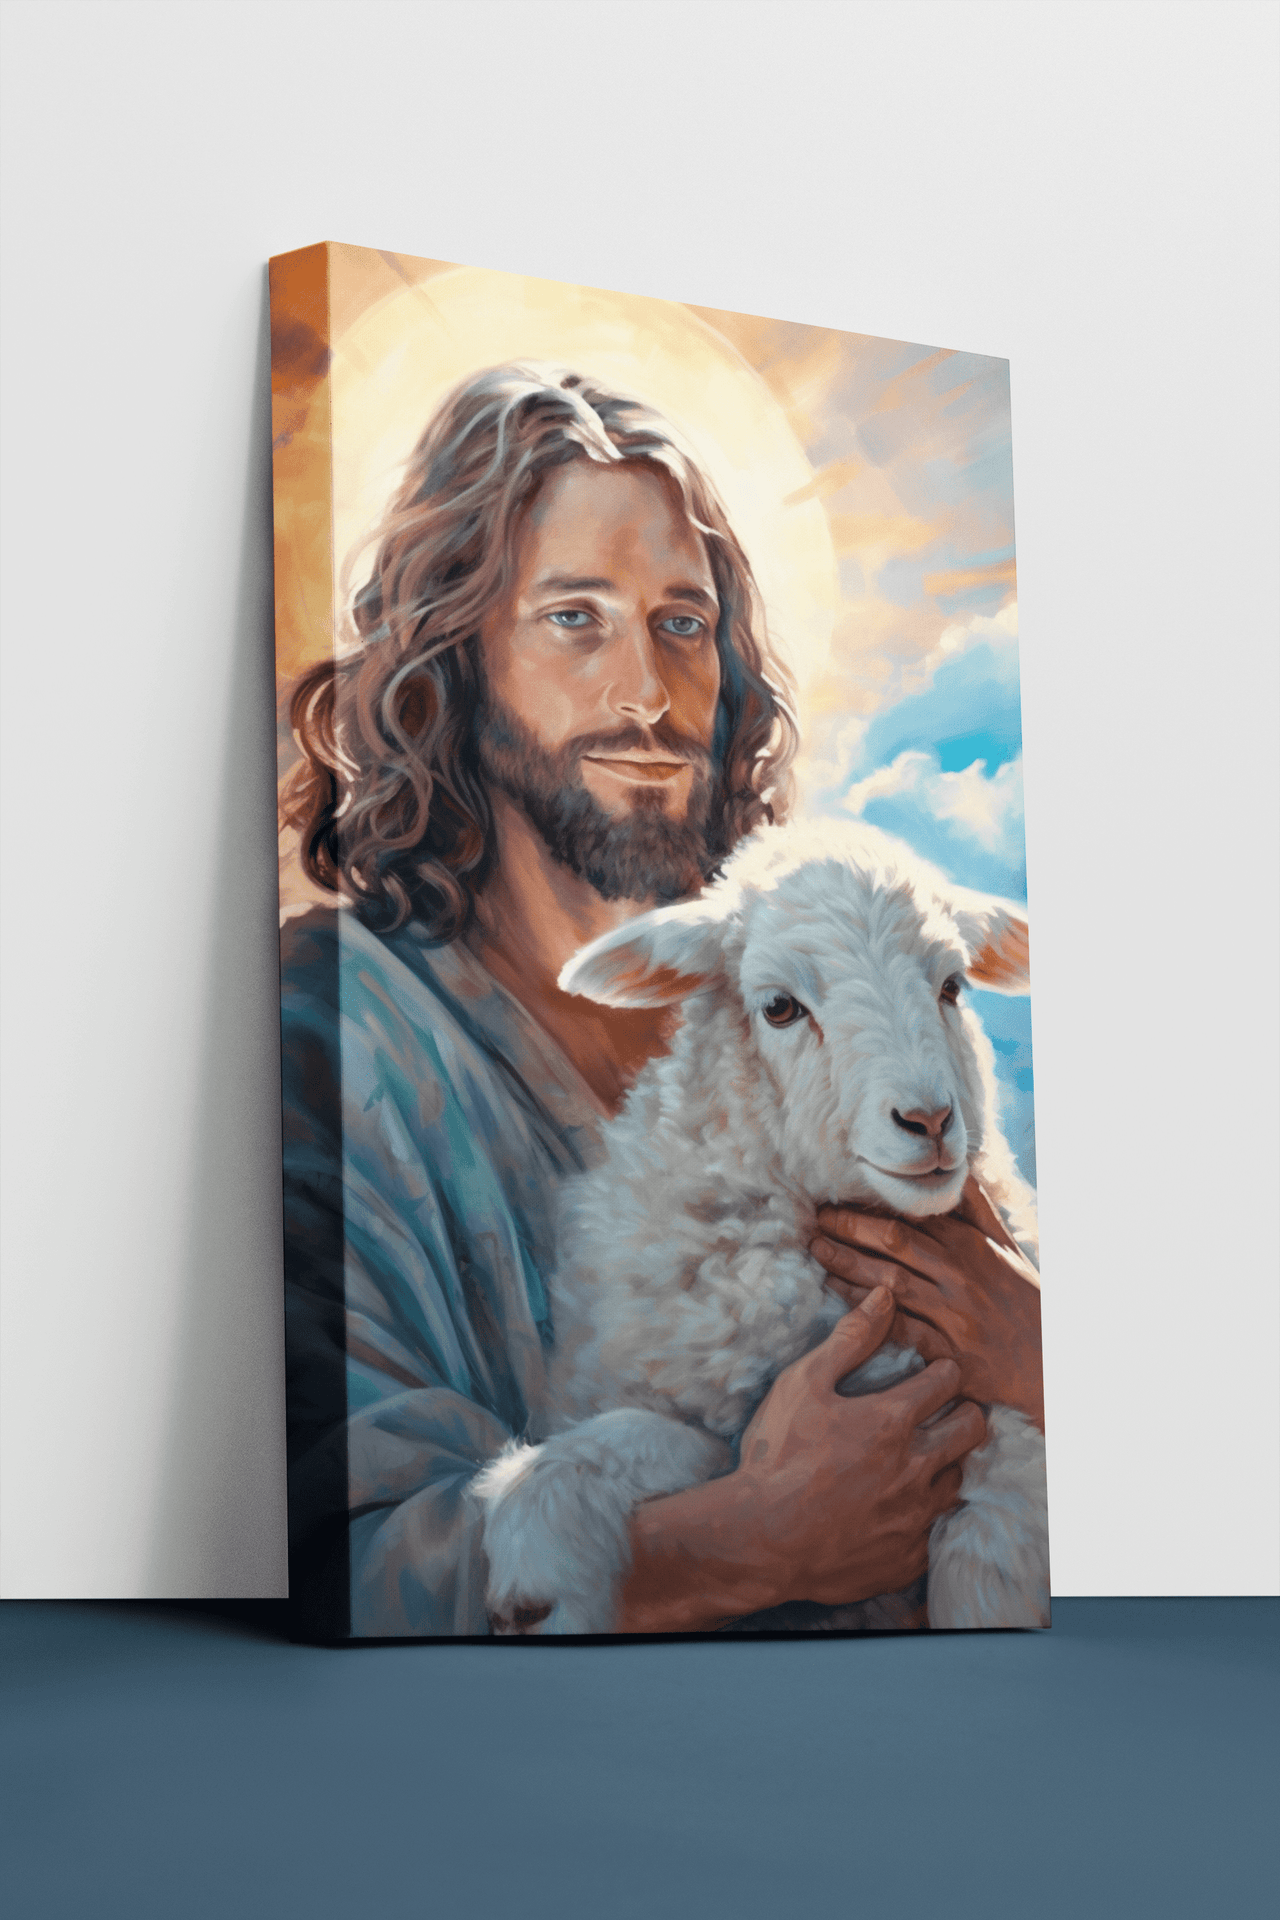 Jesus and Lamb Art Canvas, Jesus Holding the Lost Lamb, Loss Lamb Art Canvas, Jesus Lamb of God, Jesus and Lamb No Words, Christian Wall Decor